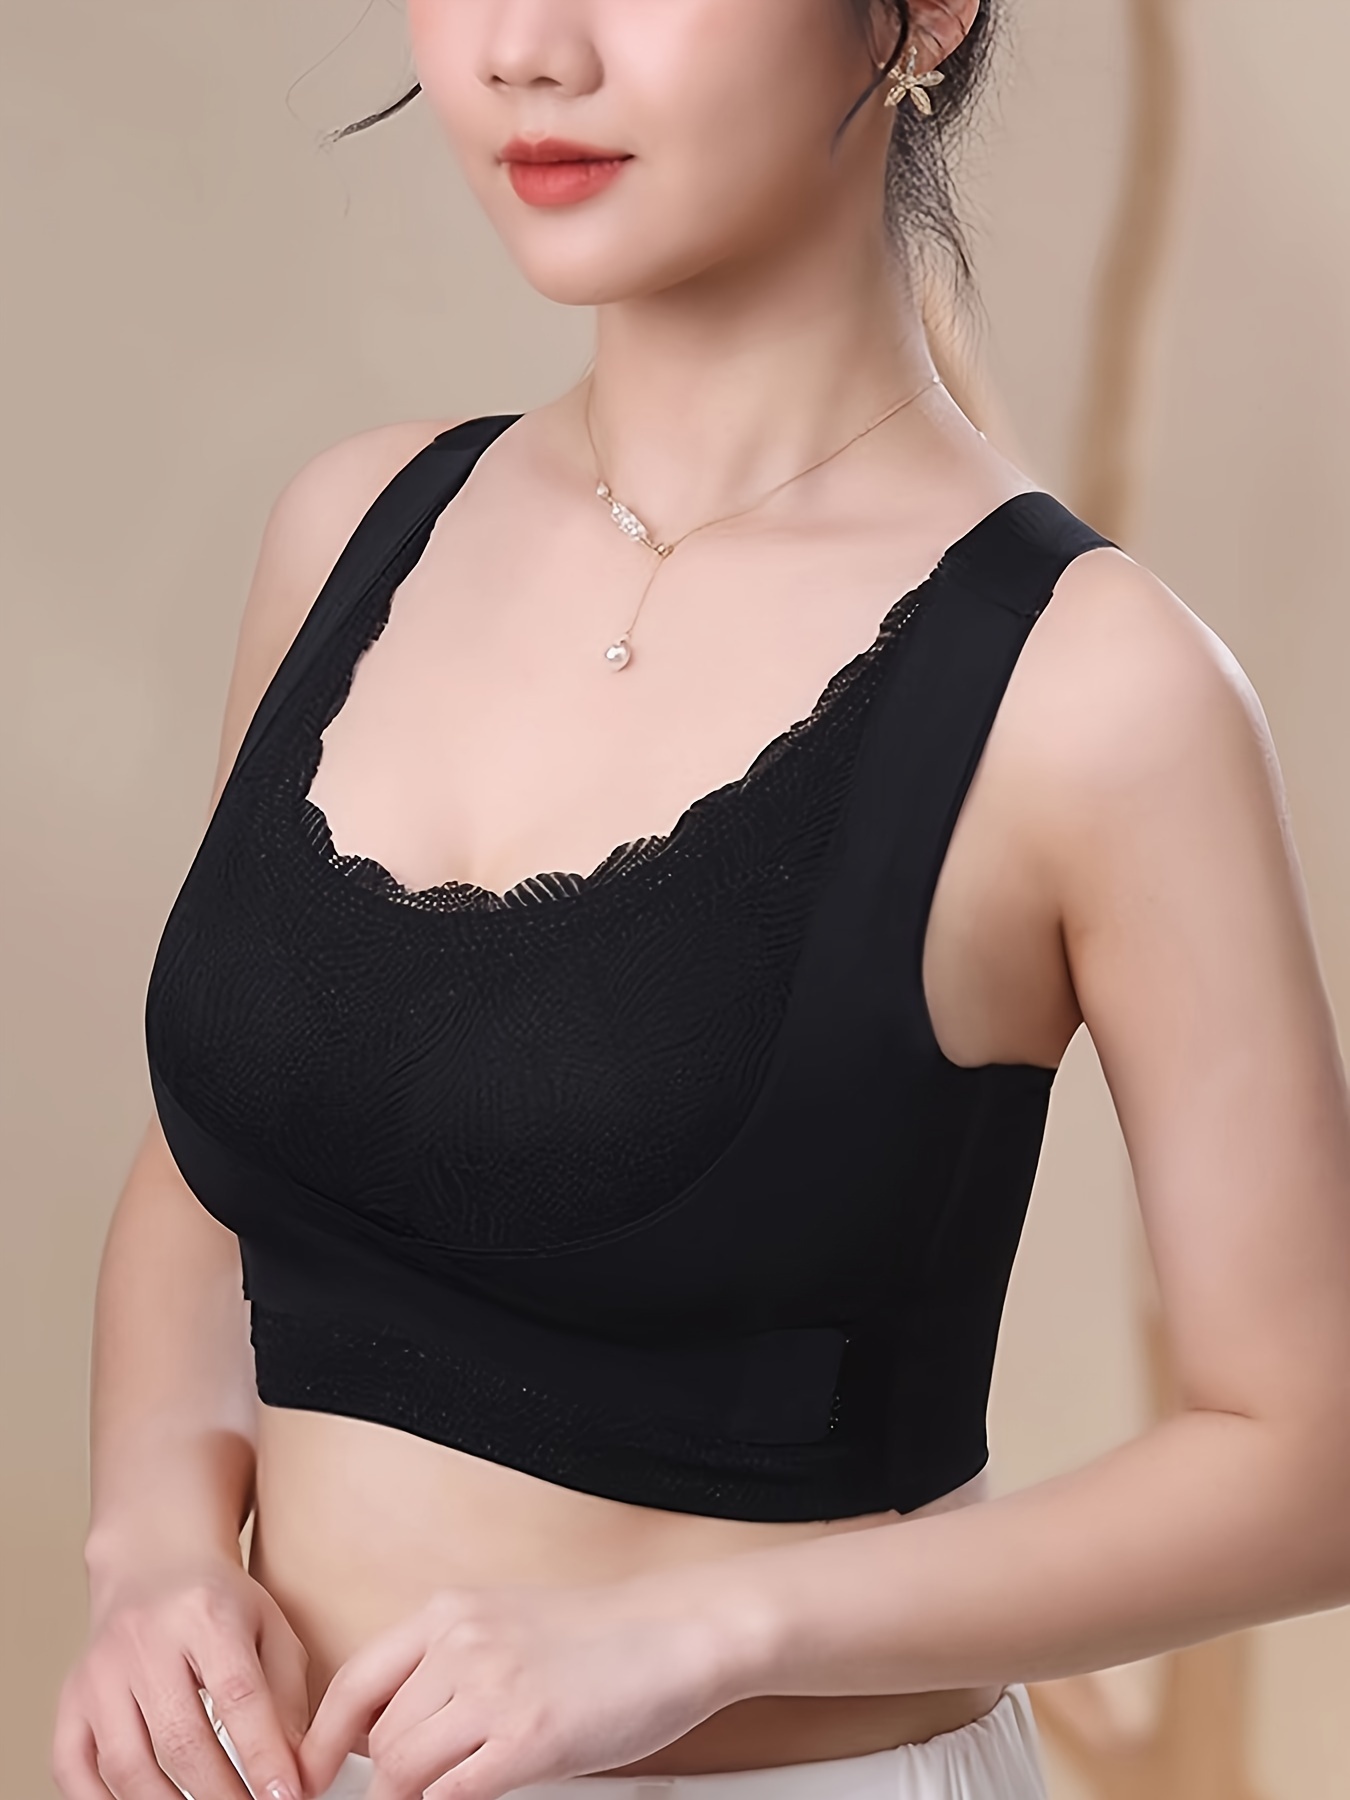 Buy Lace bra with criss-cross back Online in Dubai & the UAE